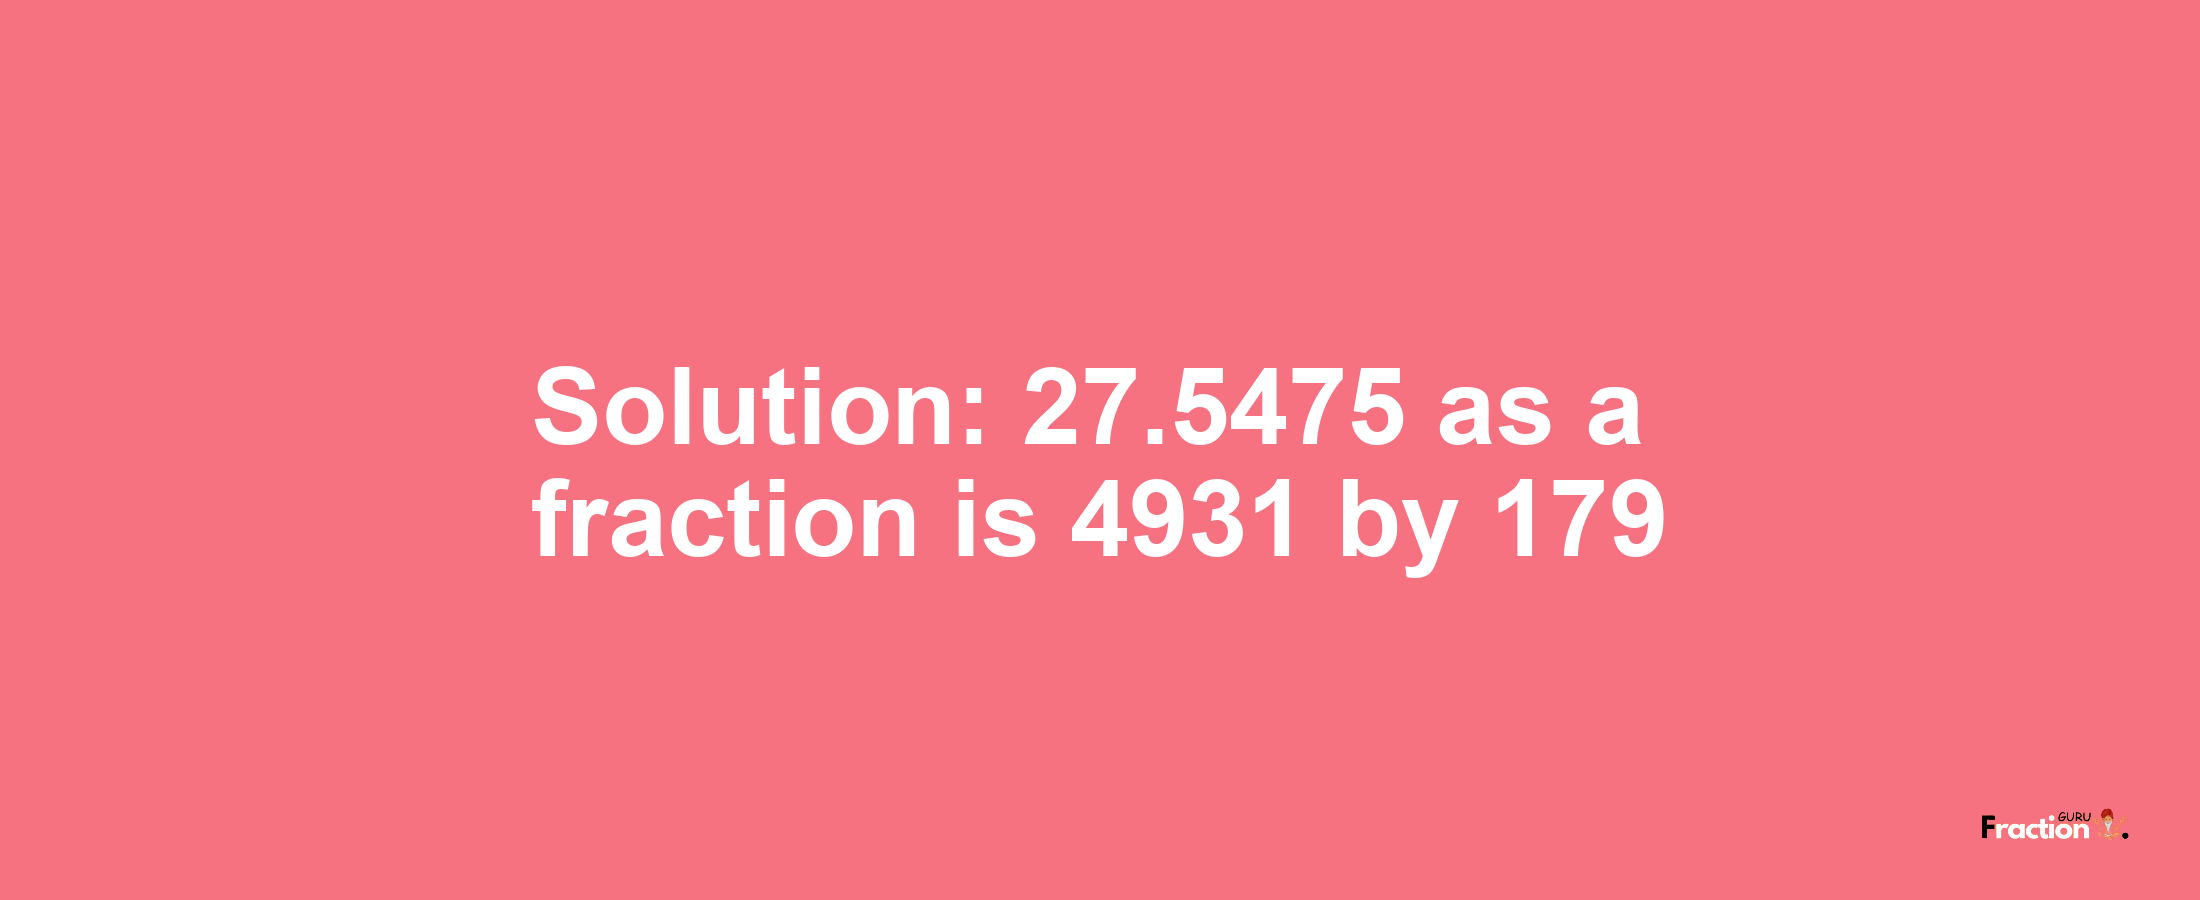 Solution:27.5475 as a fraction is 4931/179